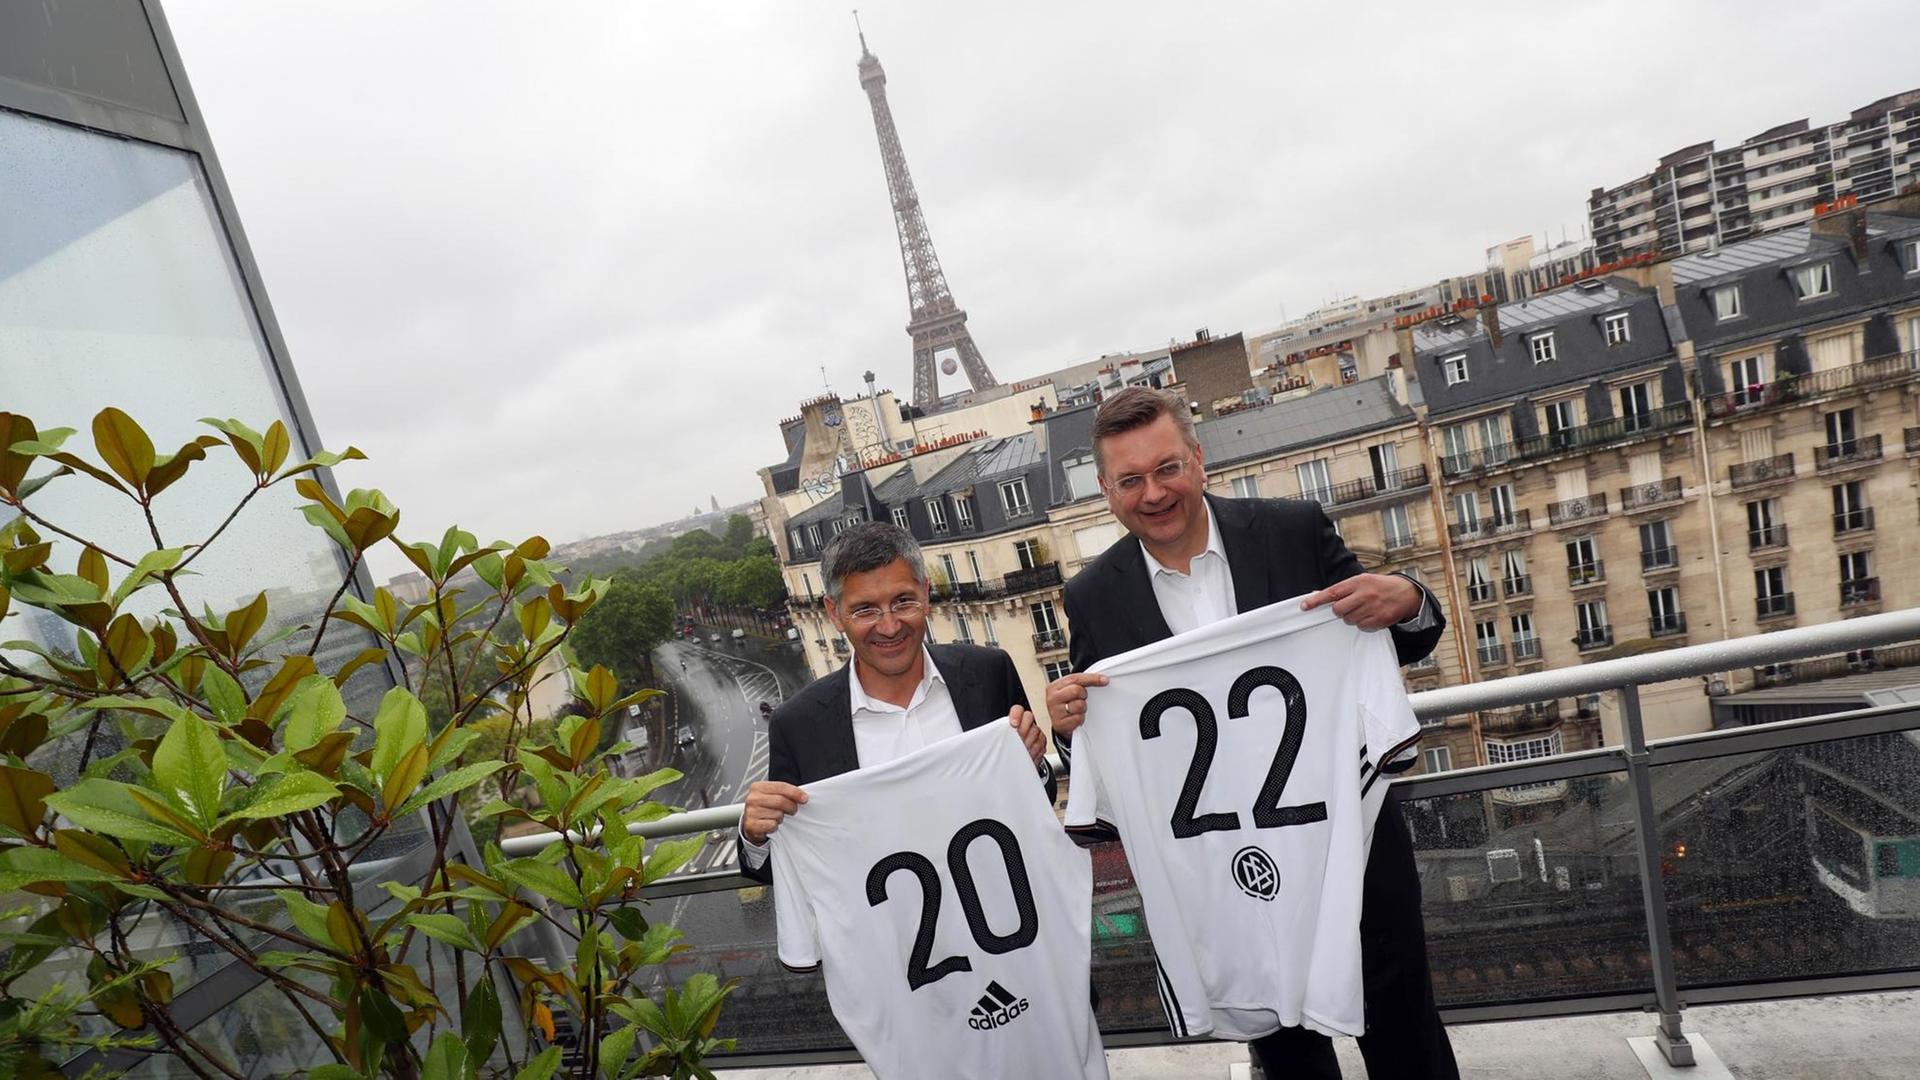 President of the German Football Association (DFB) Reinhard Grindel (R) and CEO of Adidas-Group Herbert Hainer pose in front of the Eiffel Tower after a press conference about the sponsors agreement between DFB and adidas in Paris, France, 20 June 2016. The UEFA EURO 2016 takes place from 10 June to 10 July 2016 in France. Photo: Christian Charisius/dpa | Verwendung weltweit